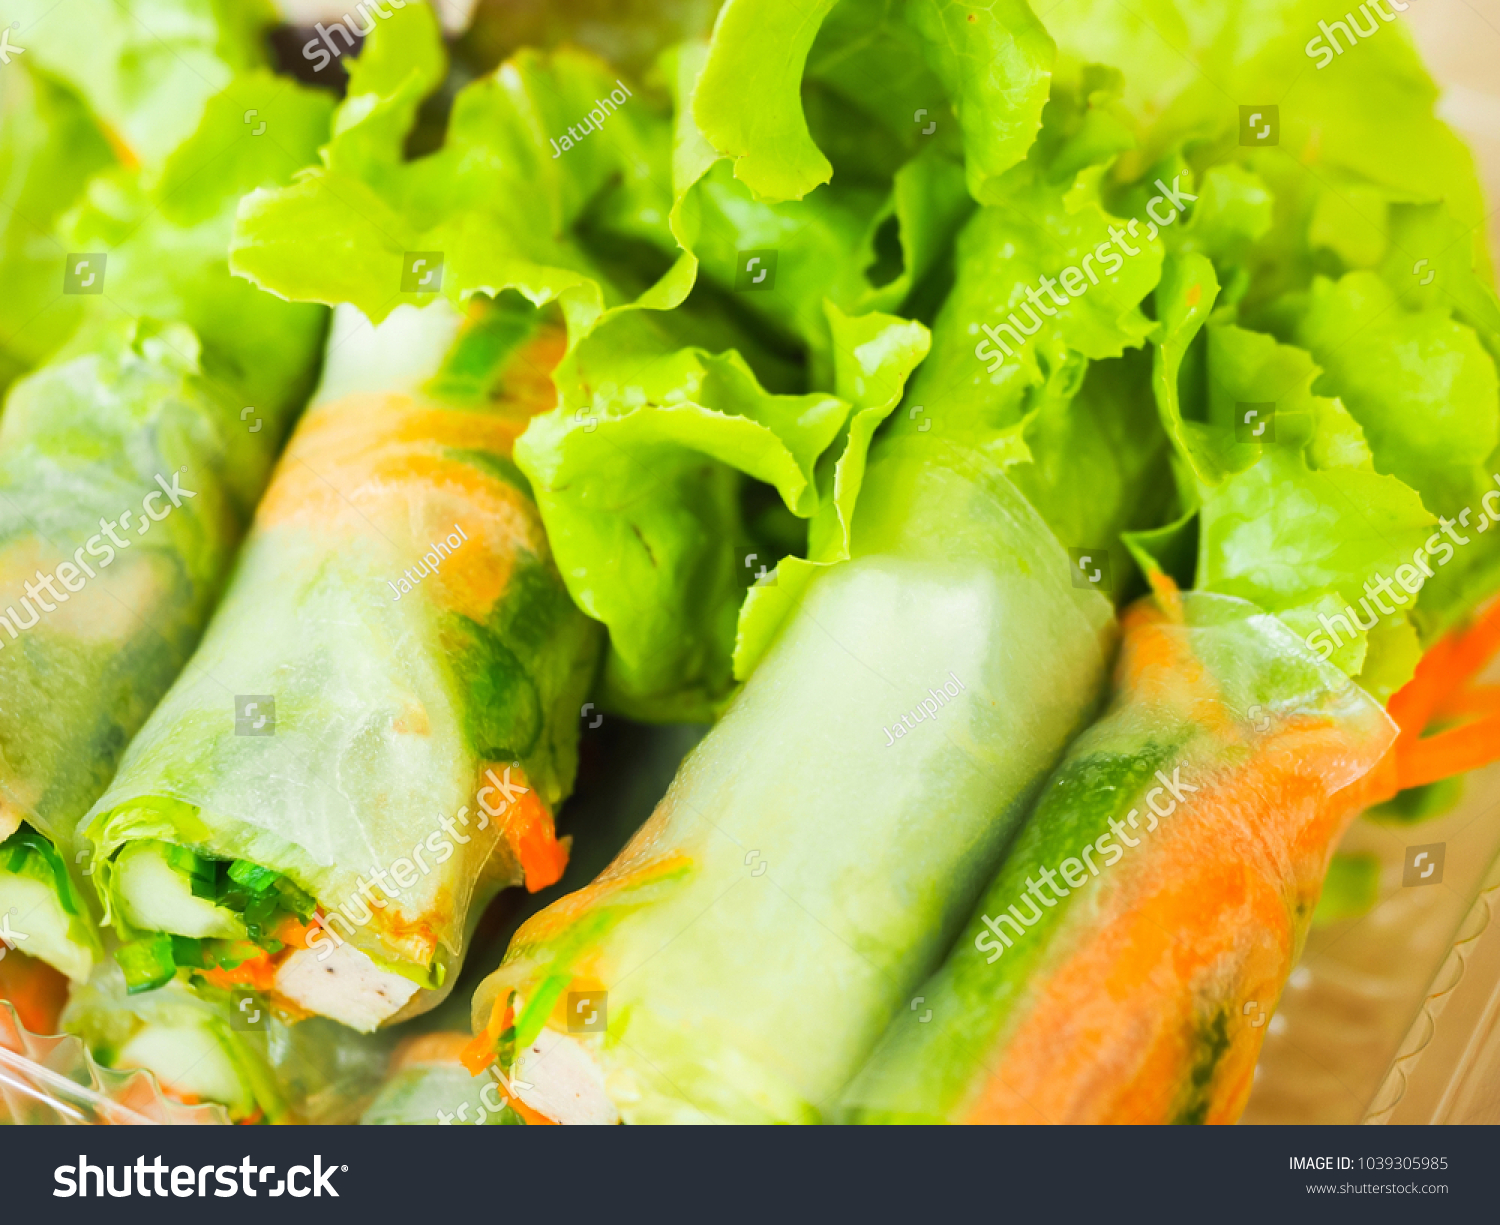 Salad Rolls made of Vegetables with Mayonnaise Sauce #1039305985